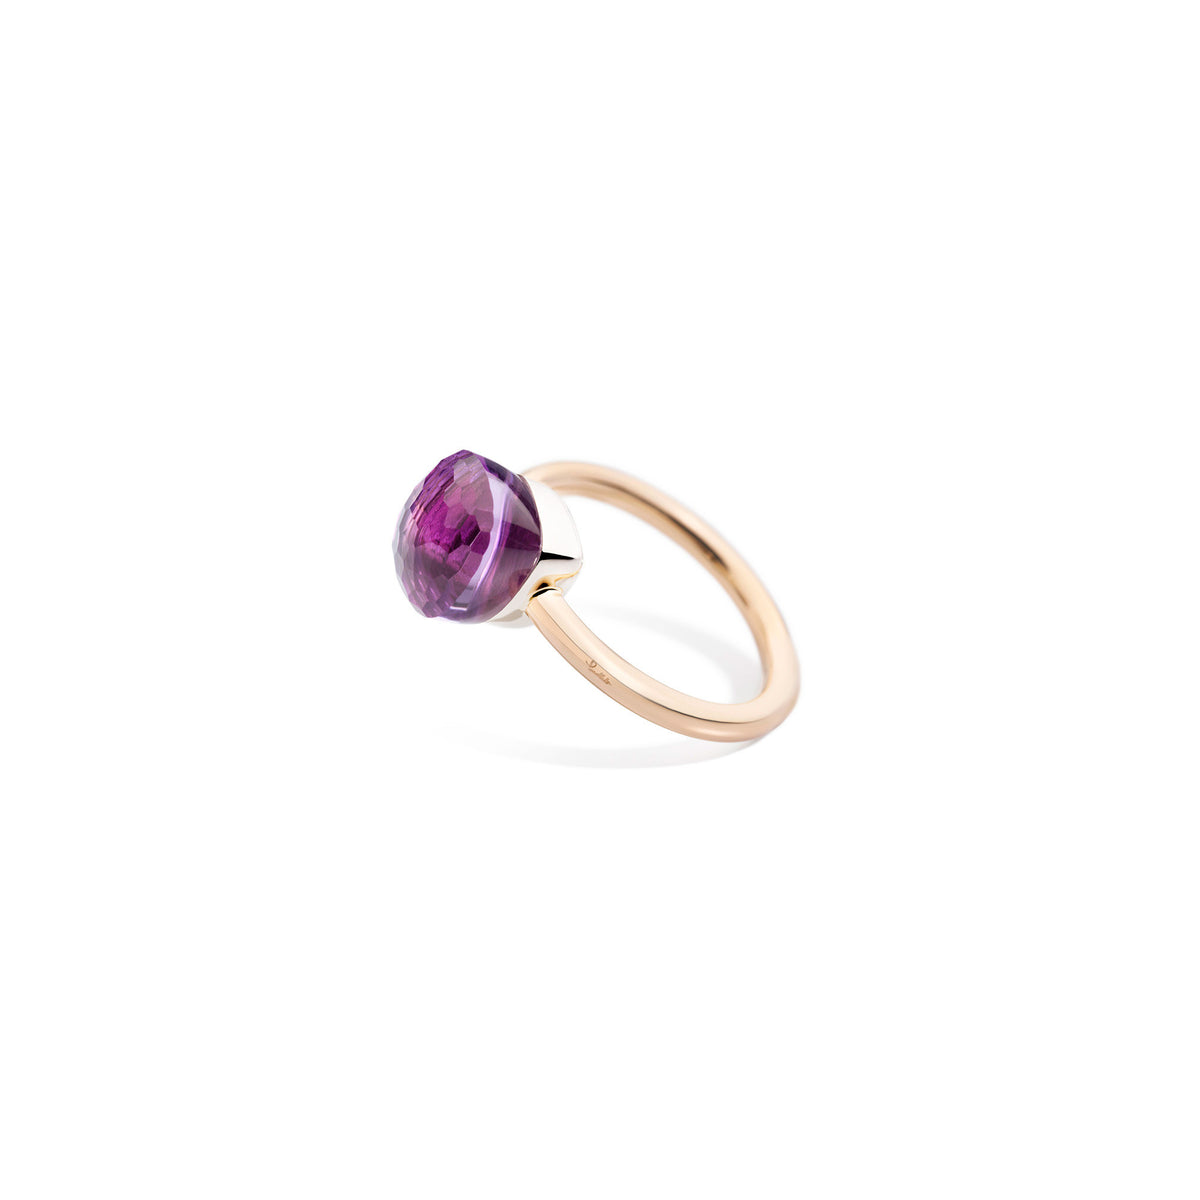 Nudo Petit Ring in 18k Rose Gold and White Gold with Amethyst - Orsini Jewellers NZ